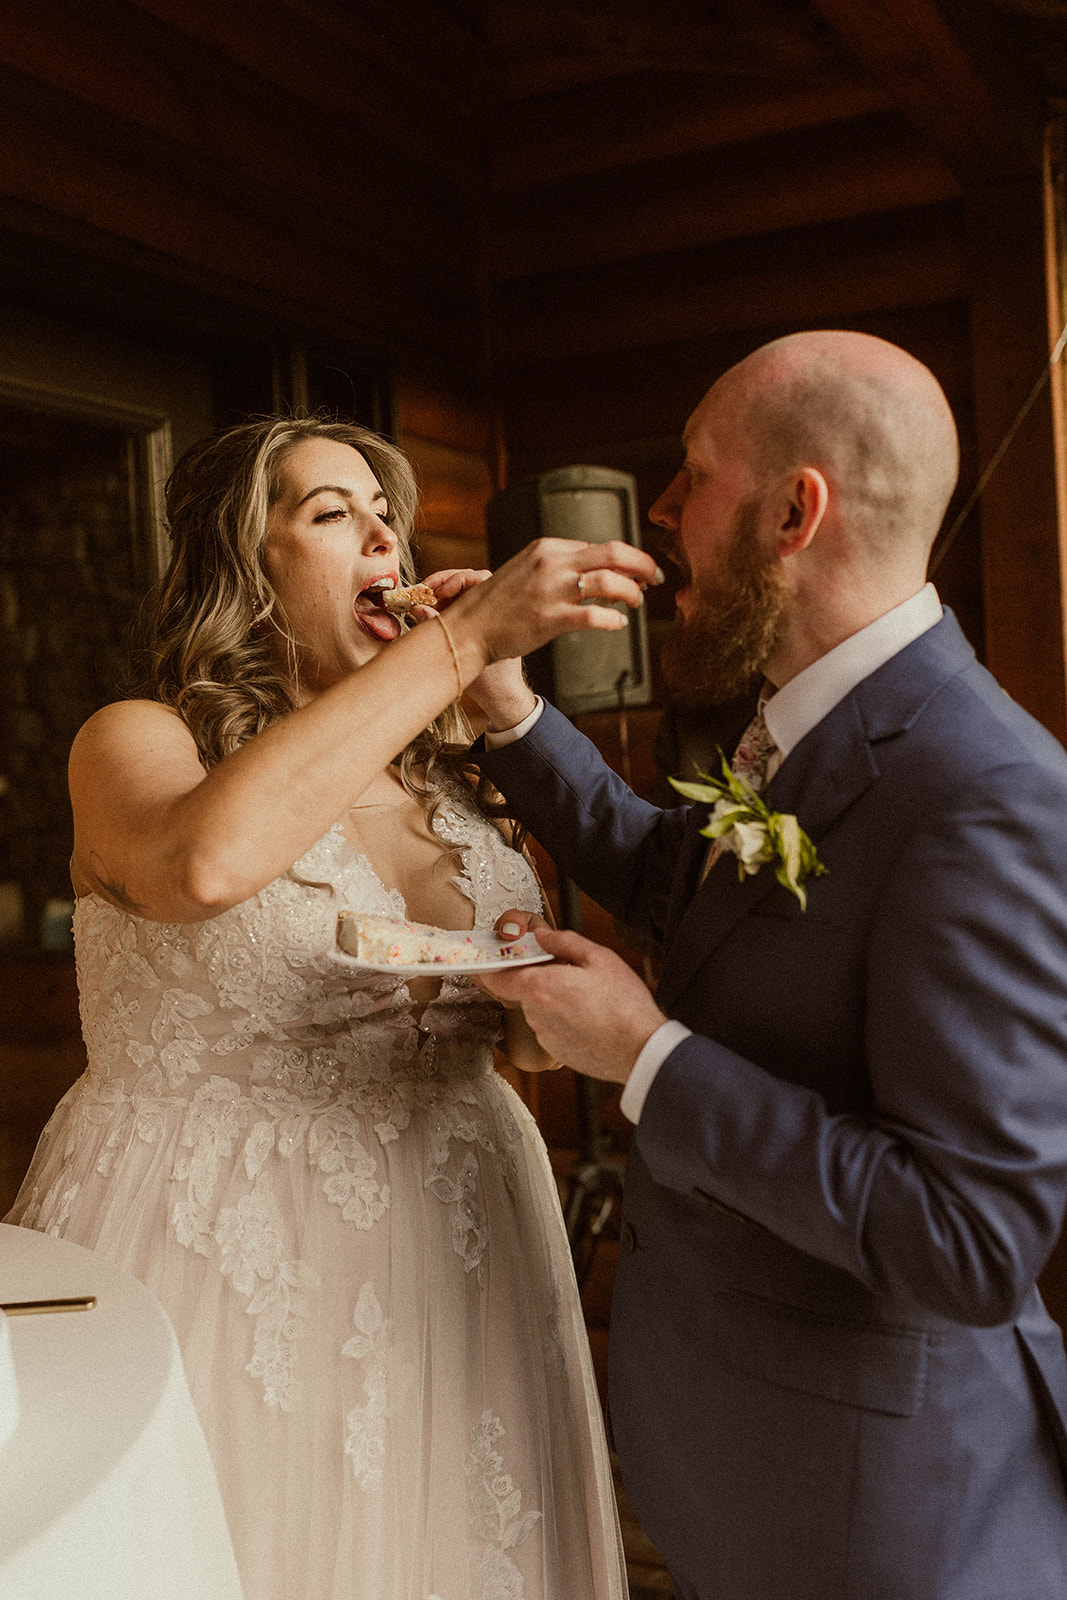 Stunning bride and groom feed each other a cake during their wedding reception at EBS view lodge